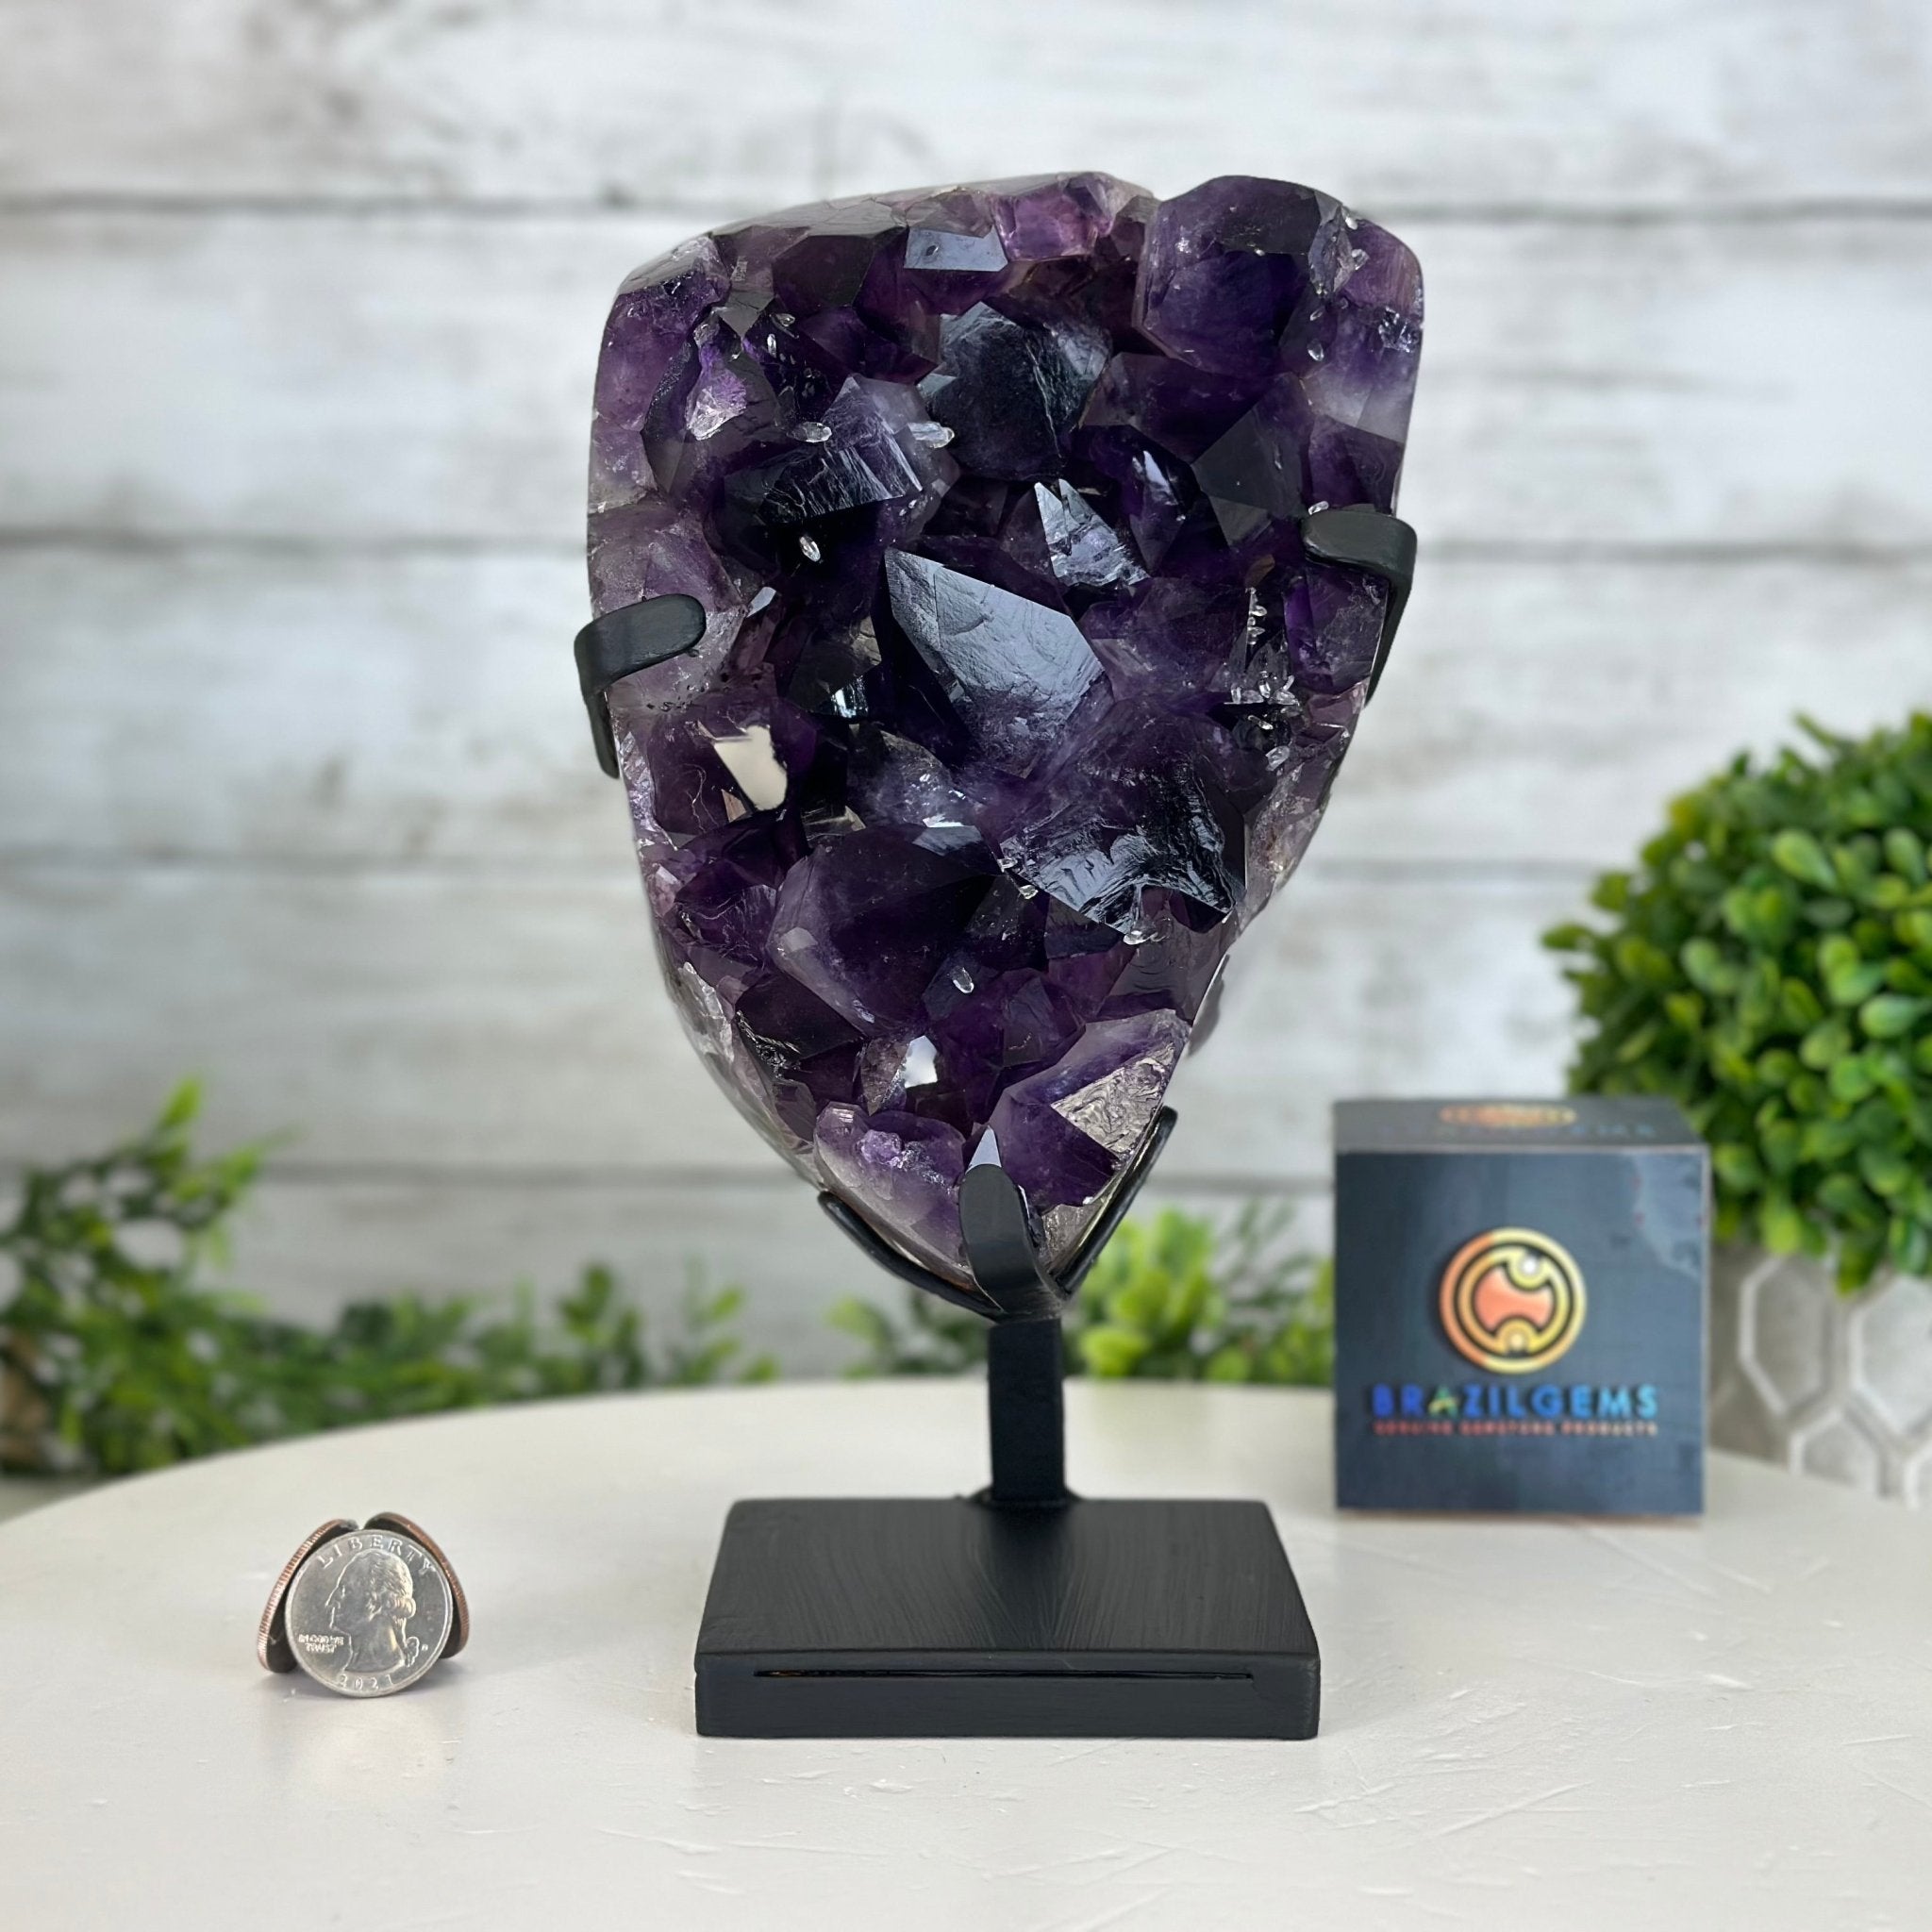 Super Quality Amethyst Cluster on a Metal Stand, 6.3 lbs & 8.8" Tall #5491-0156 - Brazil GemsBrazil GemsSuper Quality Amethyst Cluster on a Metal Stand, 6.3 lbs & 8.8" Tall #5491-0156Clusters on Fixed Bases5491-0156